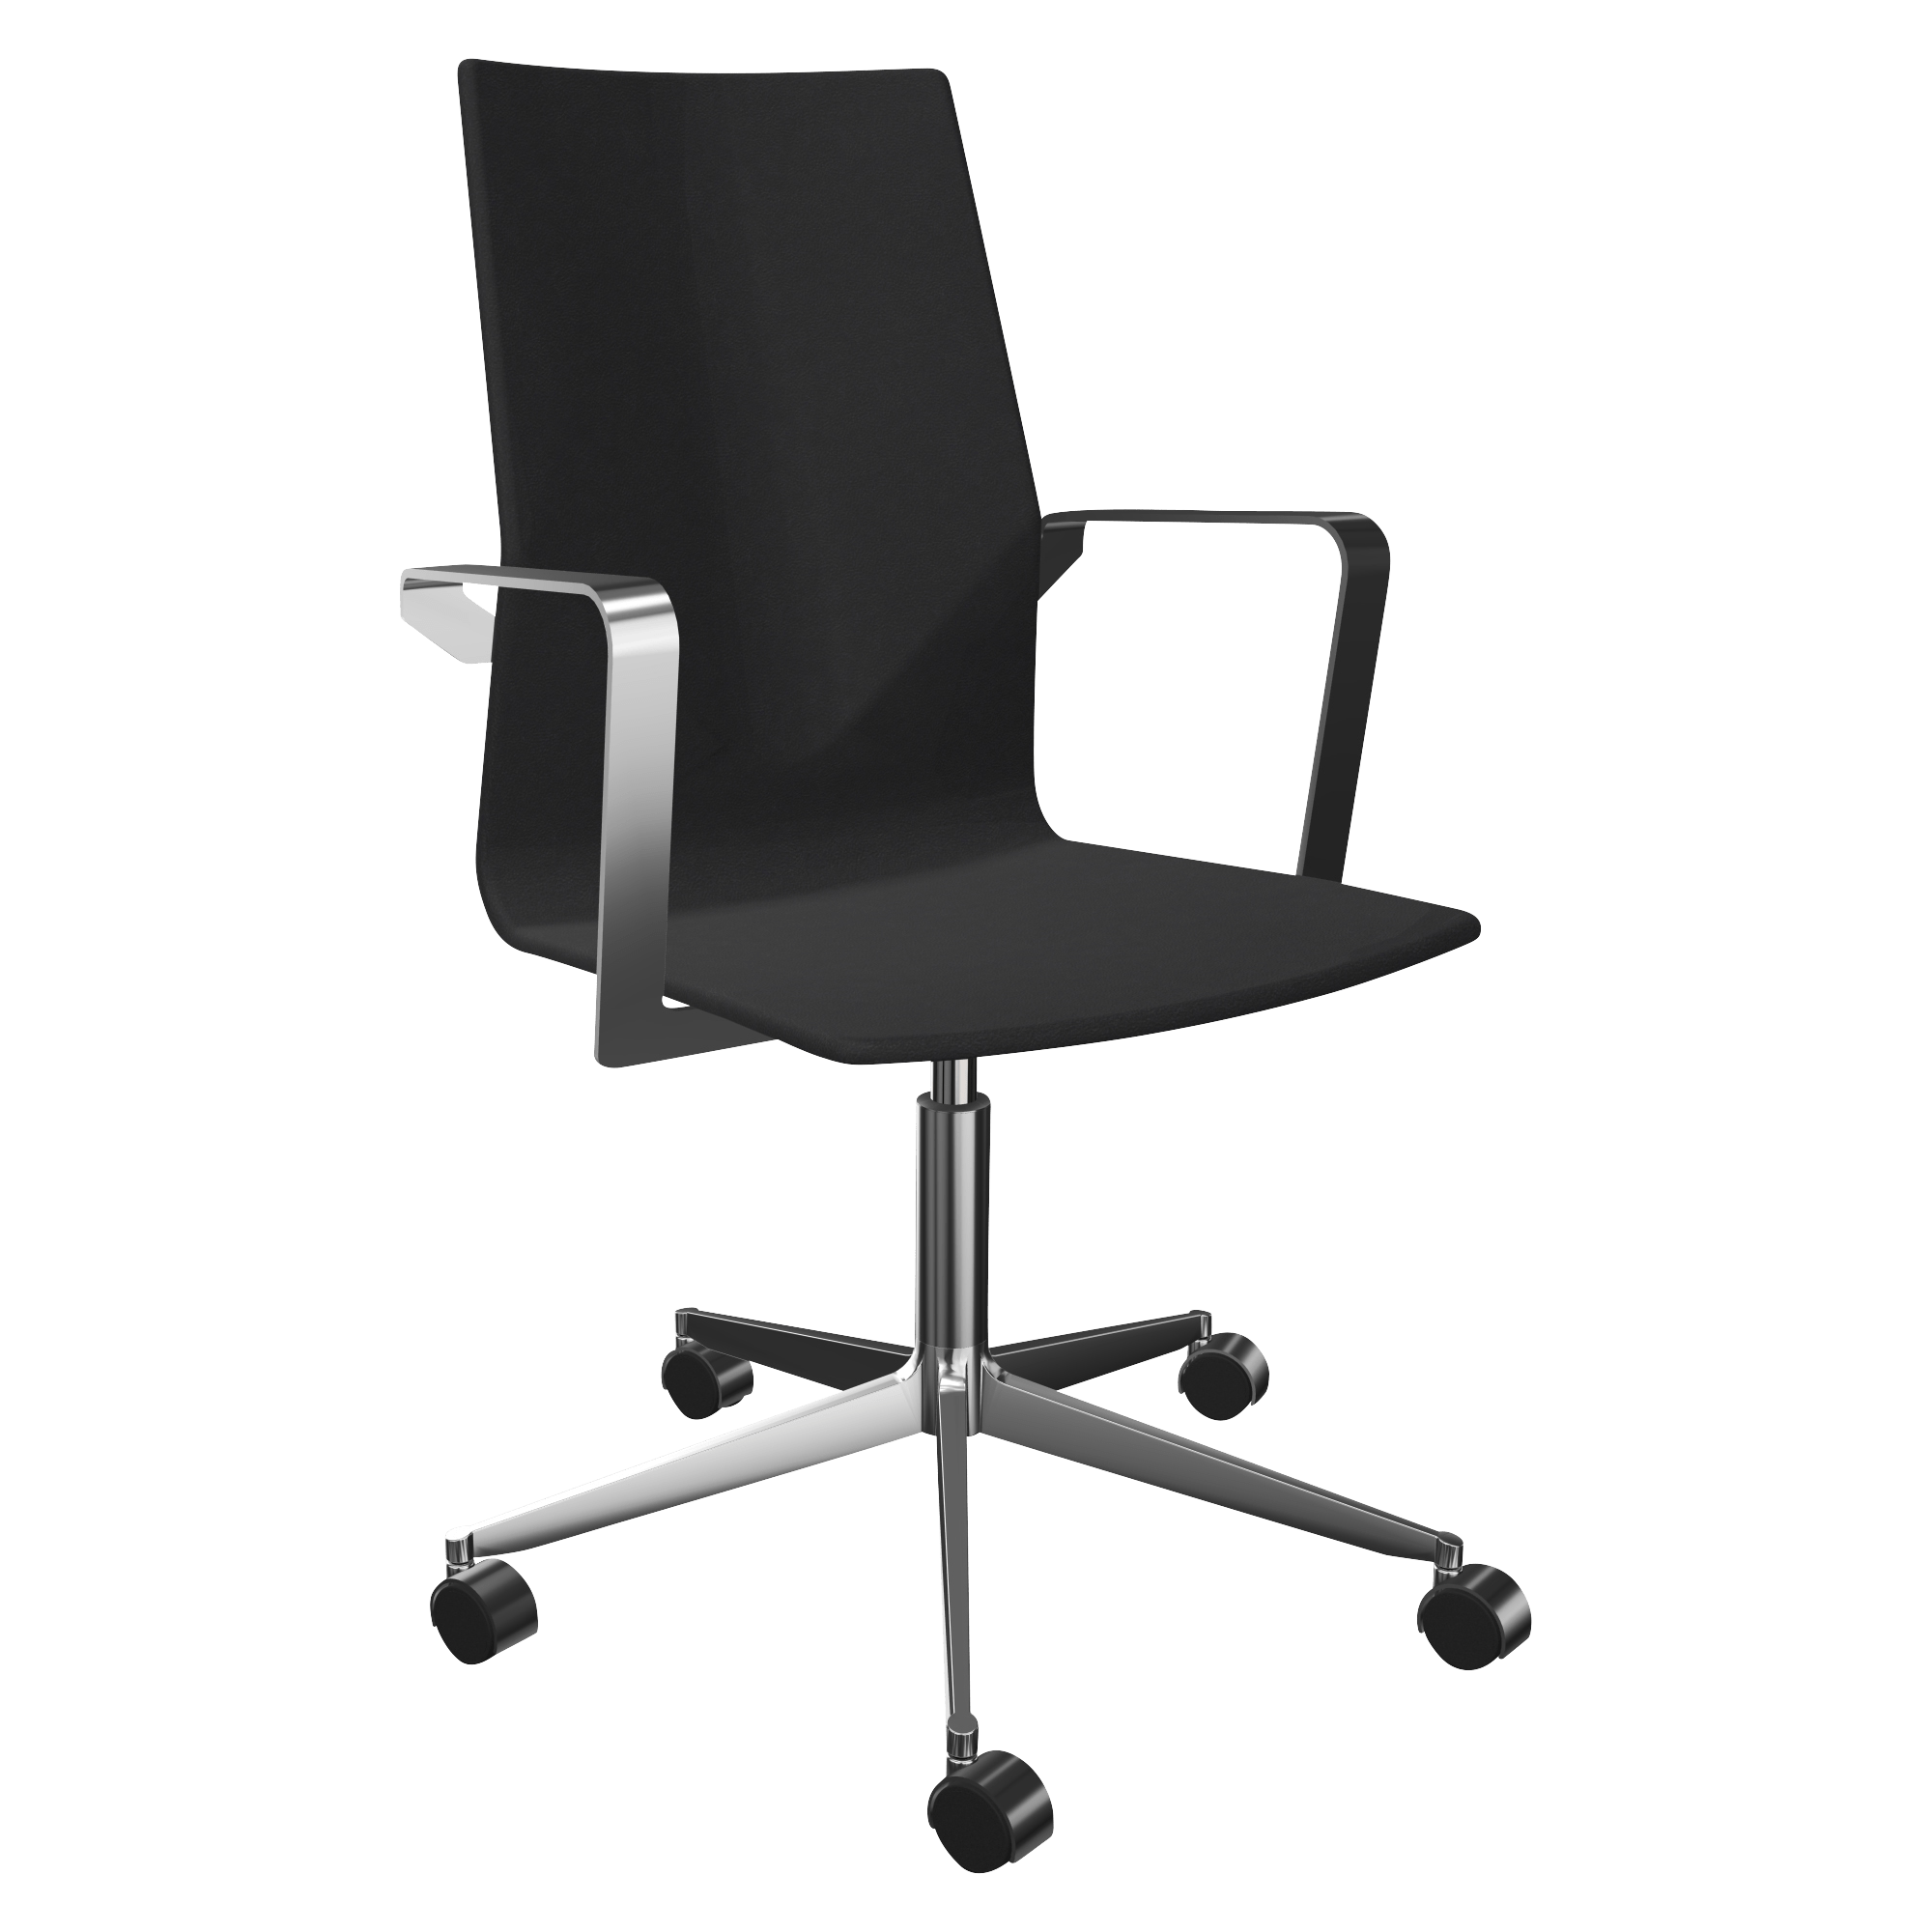 A black office chair with arm rests with a pedestal leg and wheels